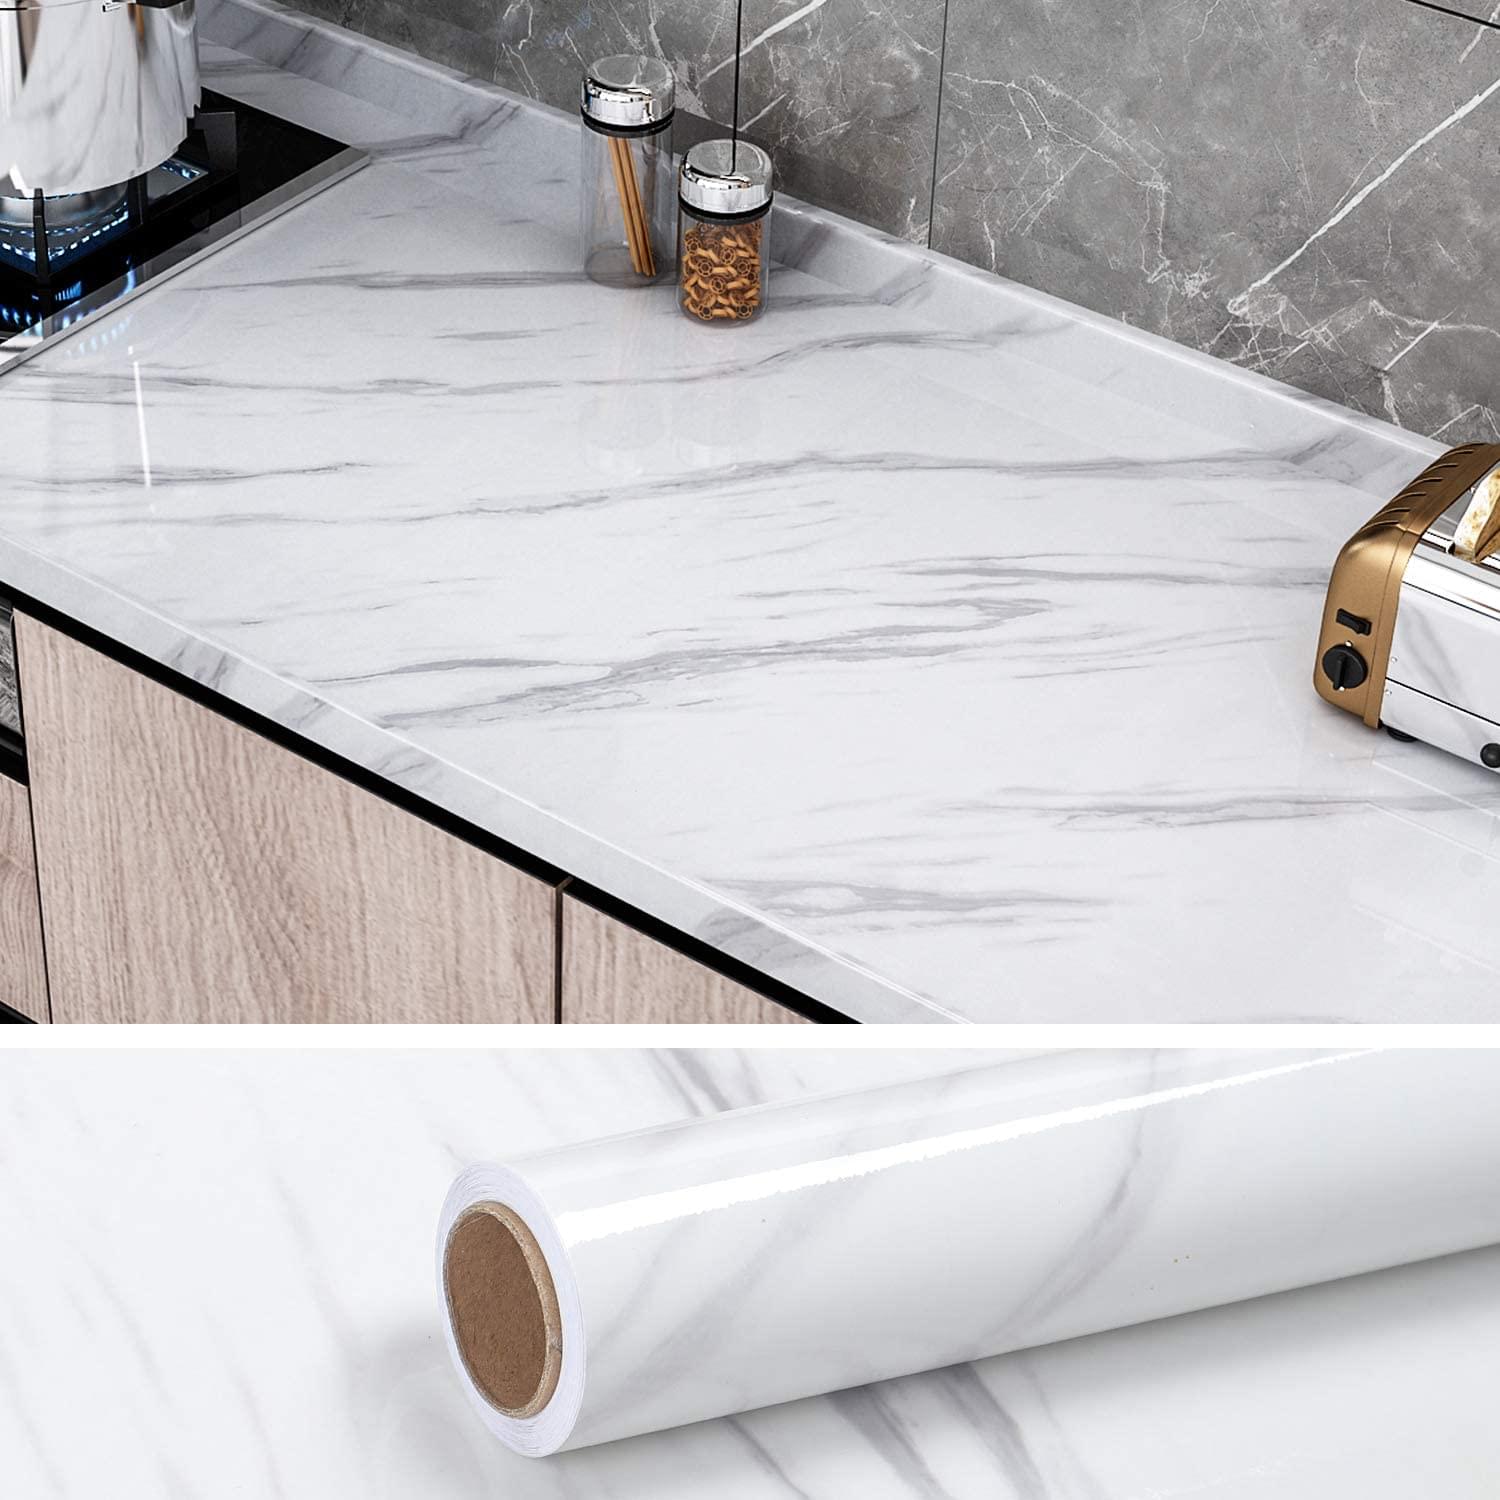 (Pack of 5) Self Adhesive White Marble Sheet for Kitchen - Waterproof Anti Oil & Heat Resistant Wallpaper Sheet (2 Feet x 6.5 feet)